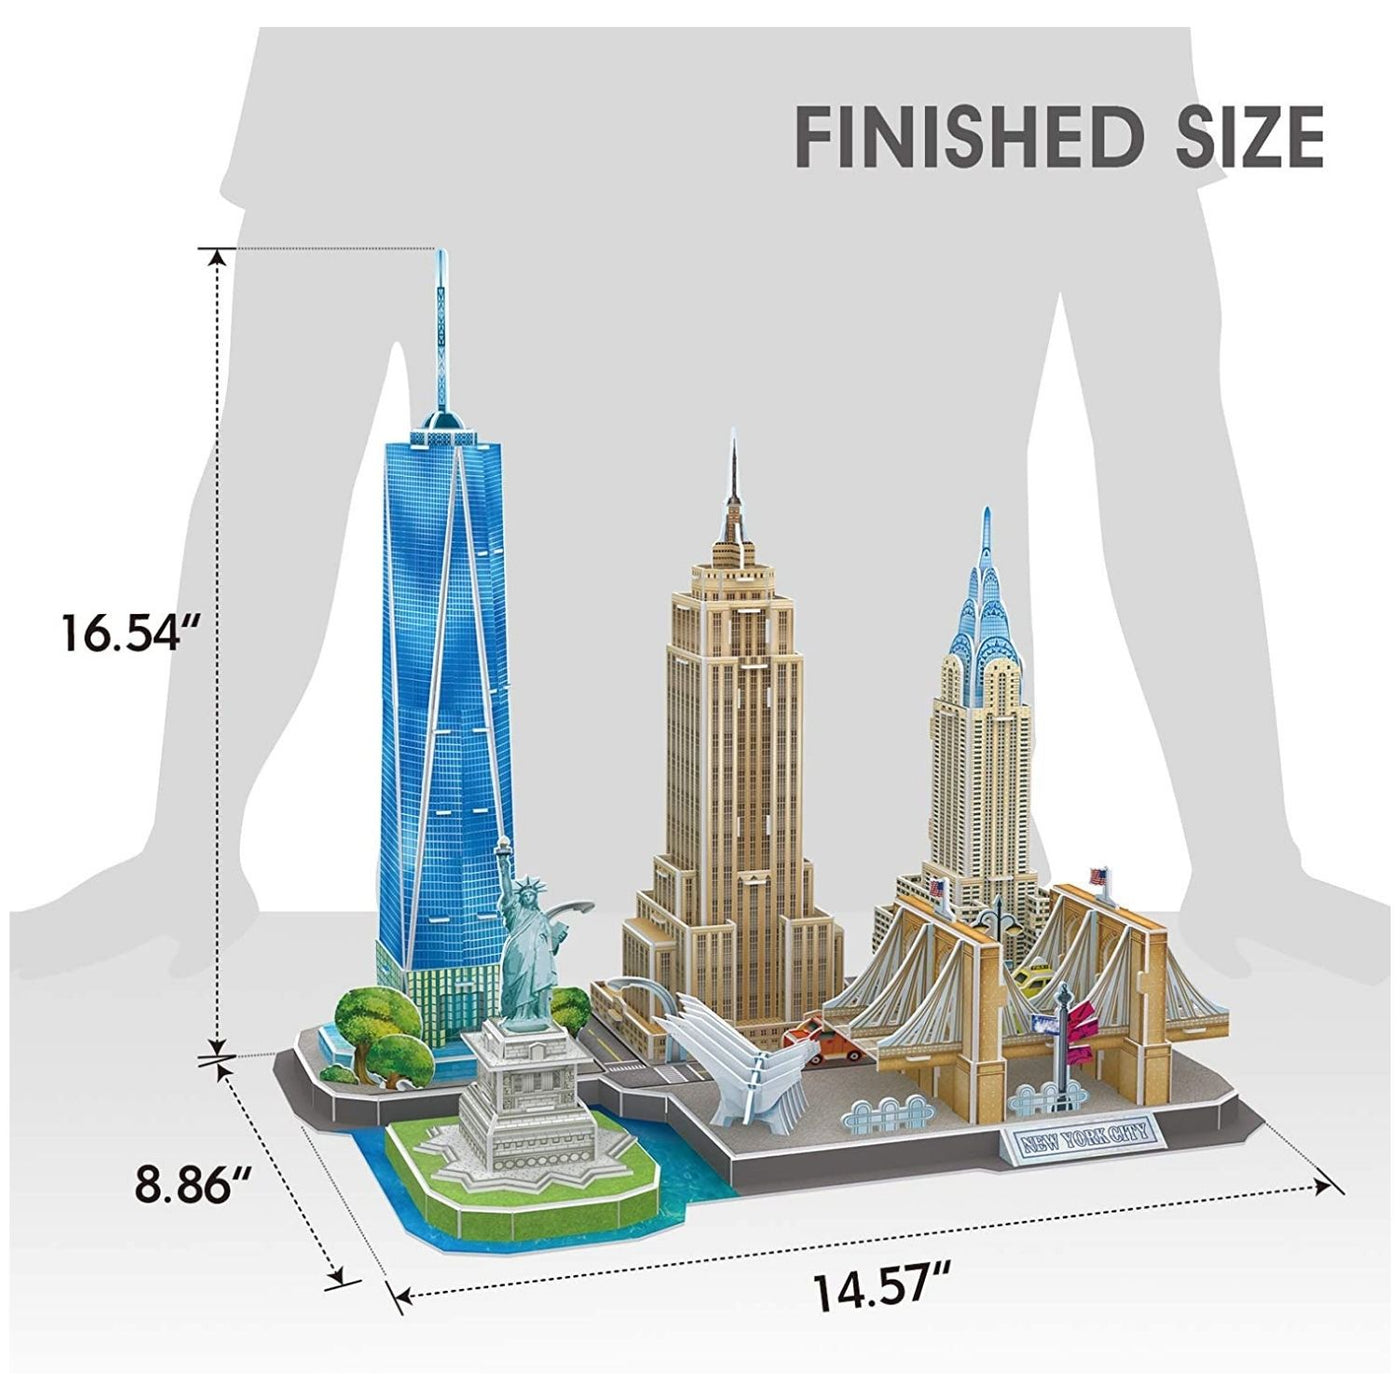 CubicFun National Geographic 3D Puzzles New York Mansion Model Kits Toys  for Adults and Children, the Empire State Building, with a Booklet